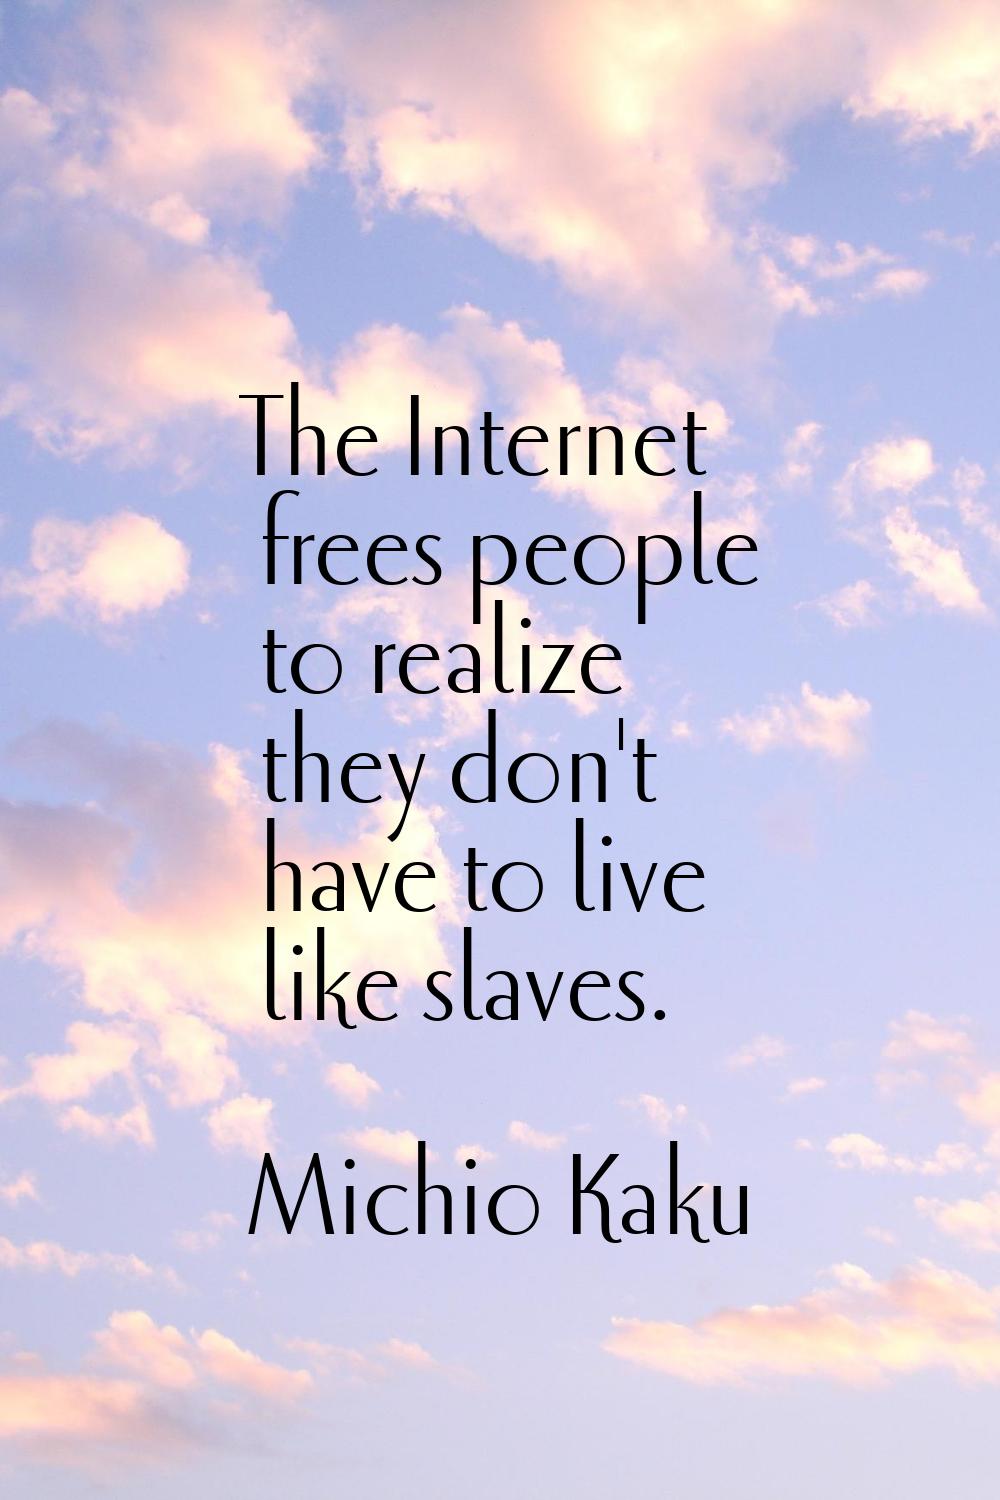 The Internet frees people to realize they don't have to live like slaves.